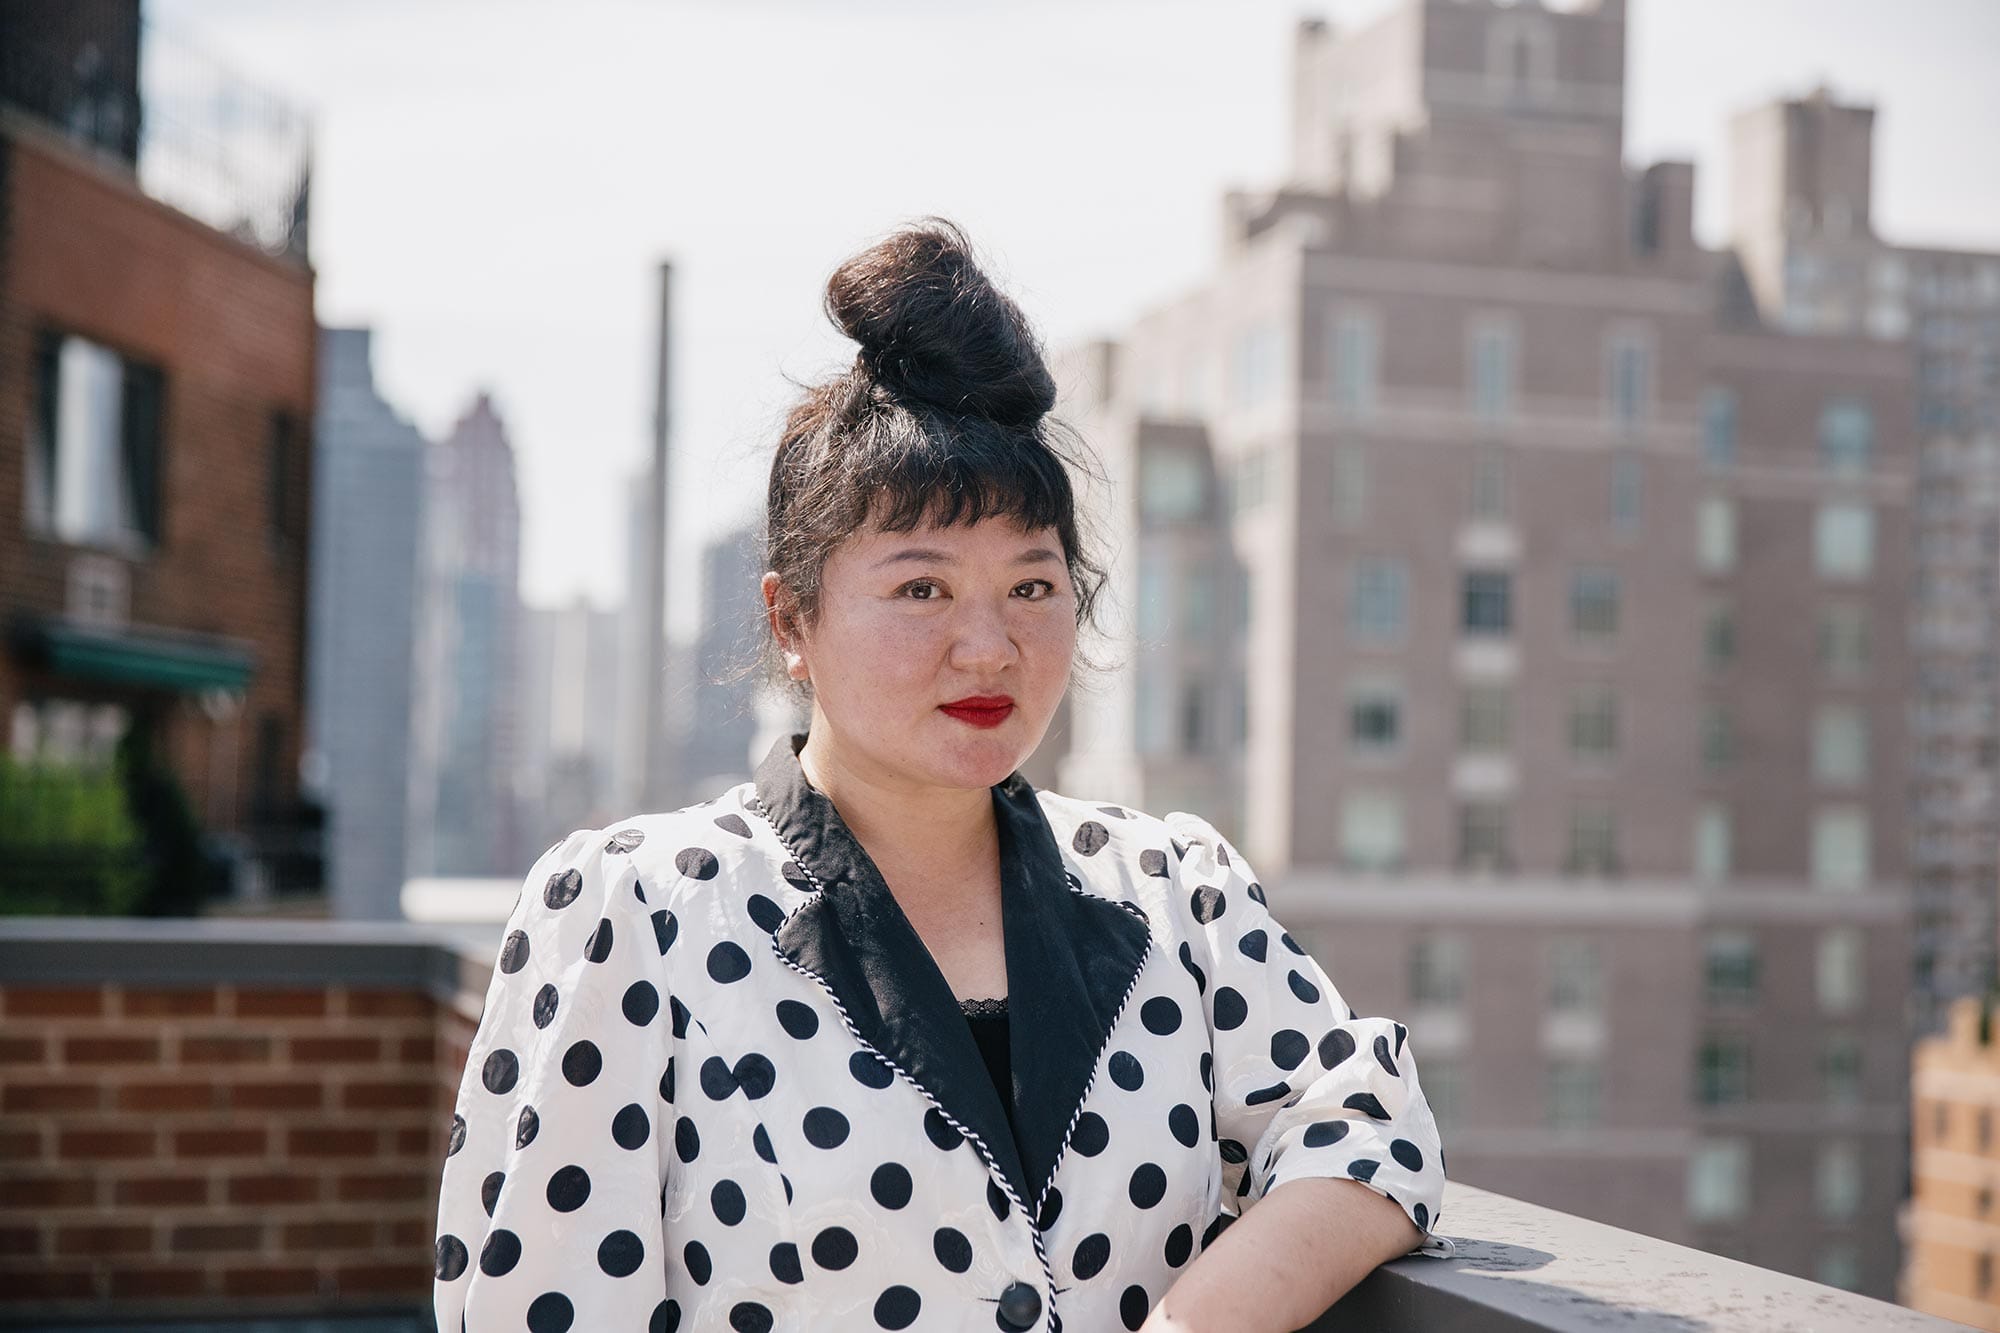 Du Yun in a white & black polkadot blazer with buildings in the background.